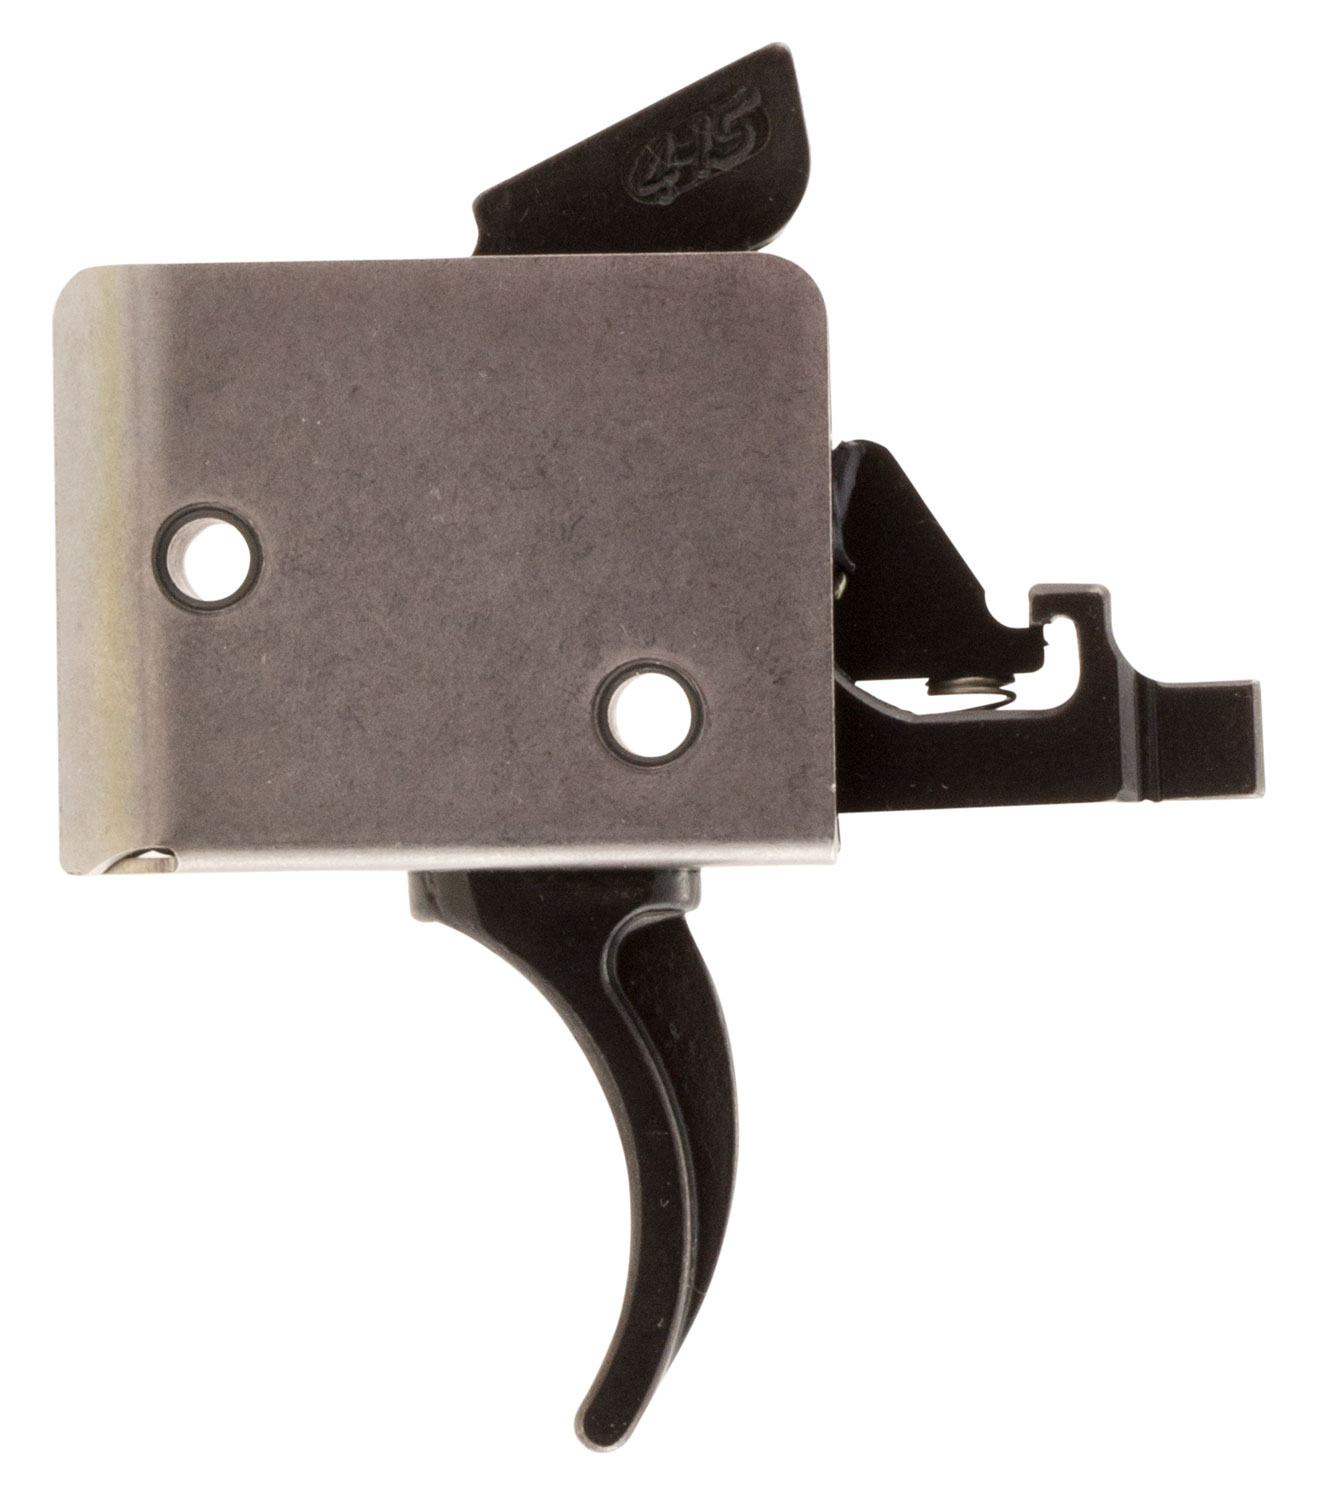 CMC Triggers 92502 Drop-In  Two-Stage Curved Trigger with 2 lbs Draw Weight & Black/Silver Finish for AR-15/AR-10